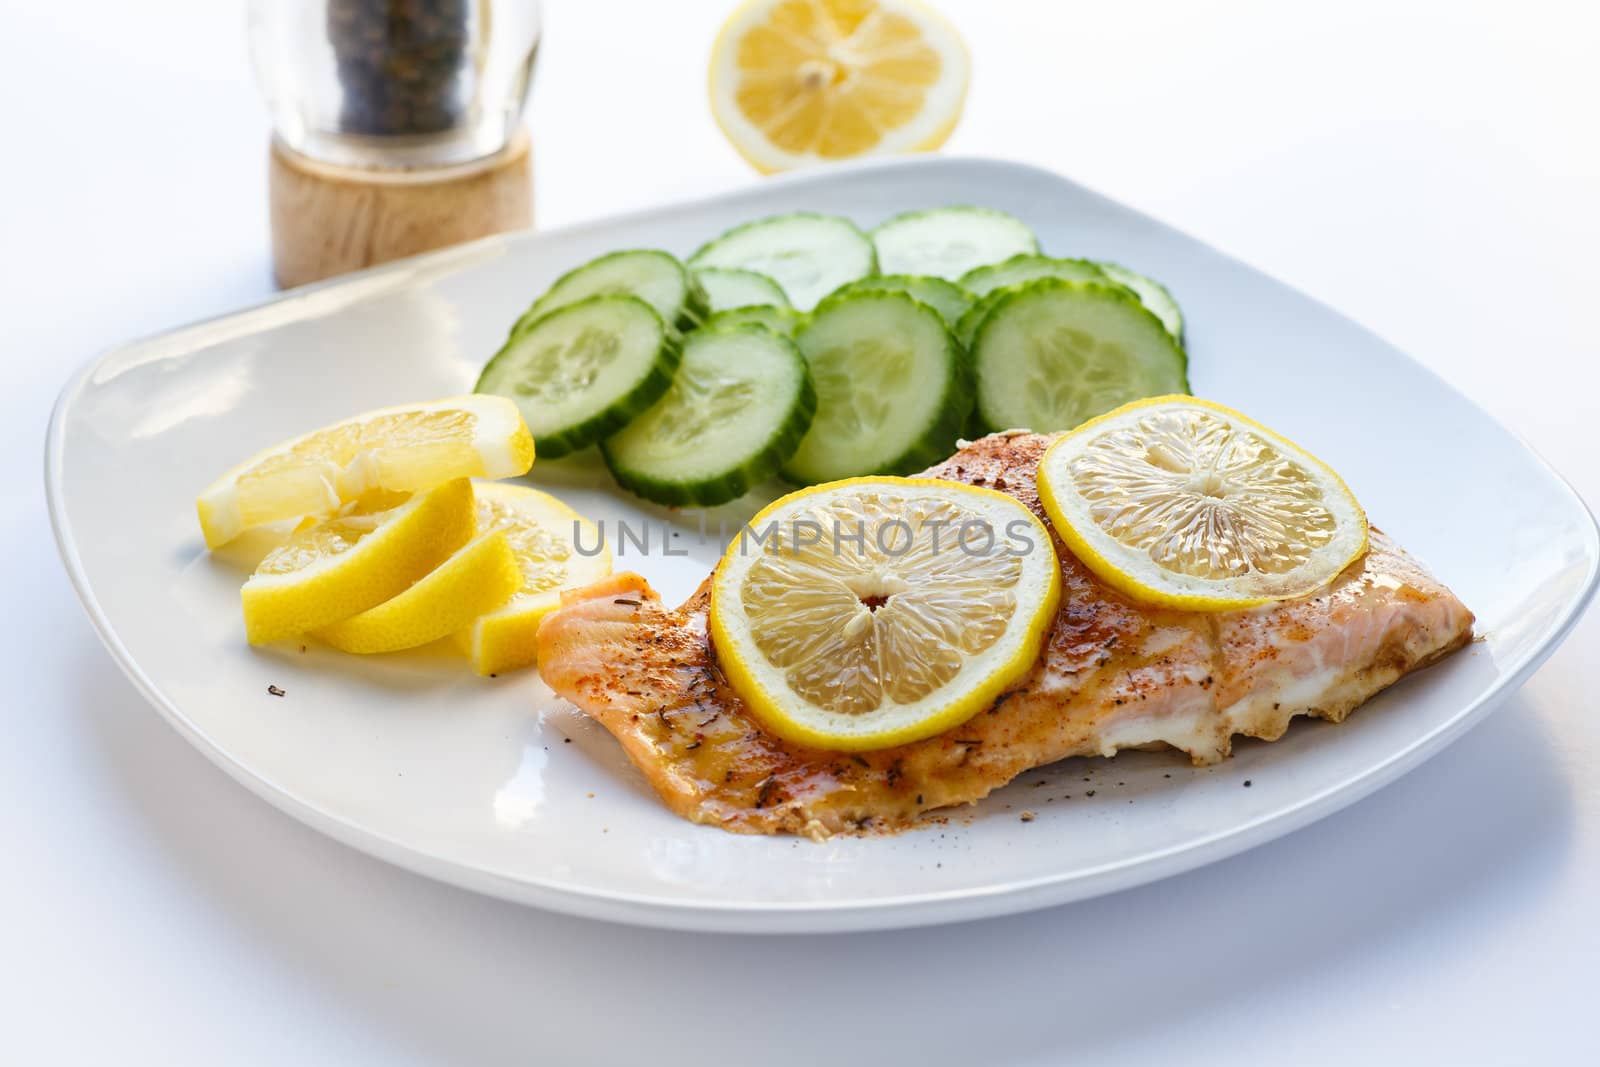 Baked salmon with lemon slices and cucumbers